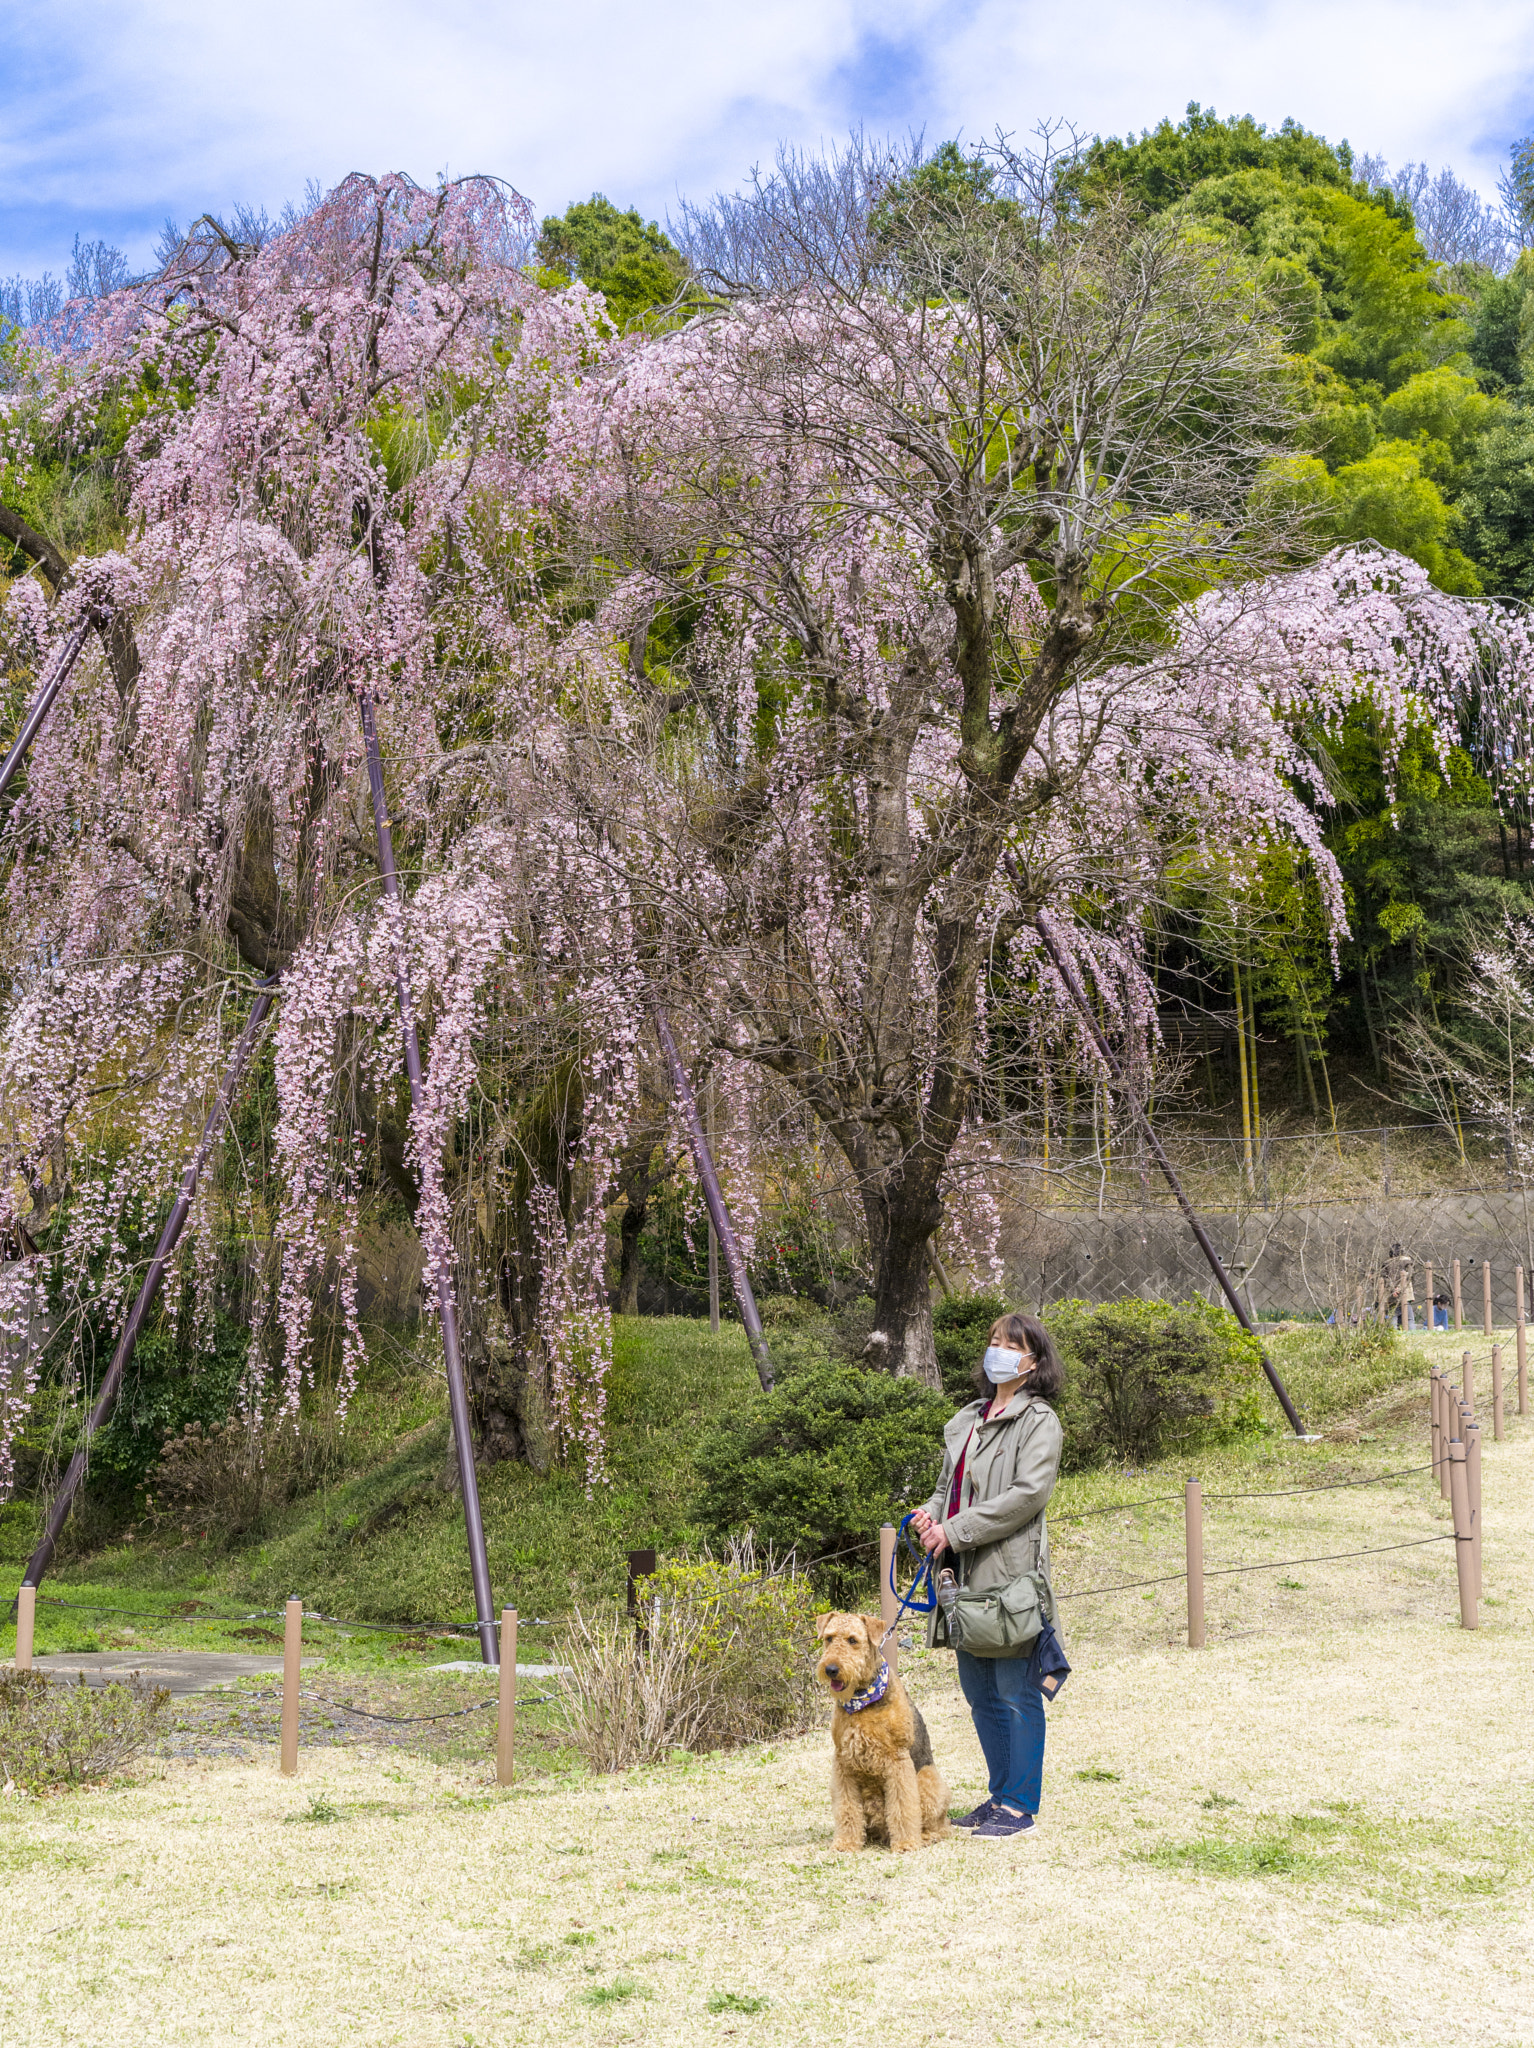 Pentax 645D sample photo. A dog and cherry blossom photography